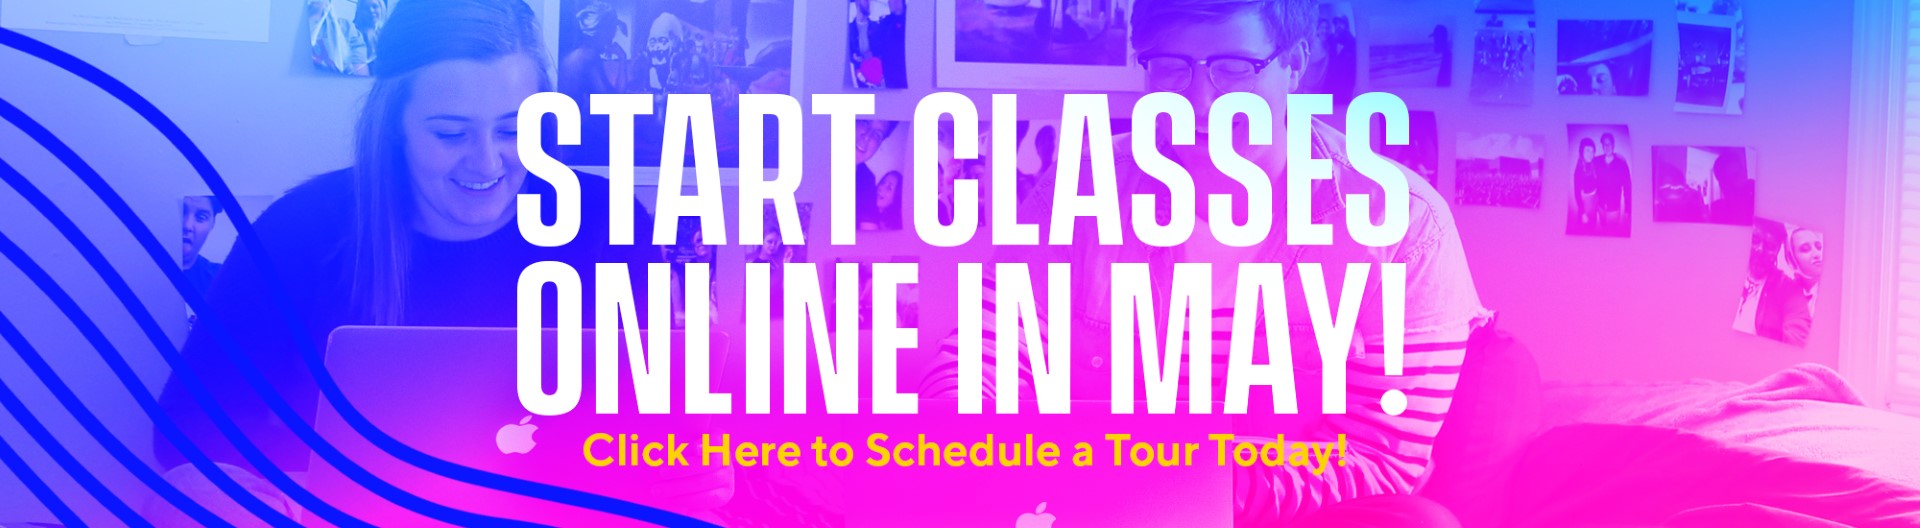 Start classes online in may